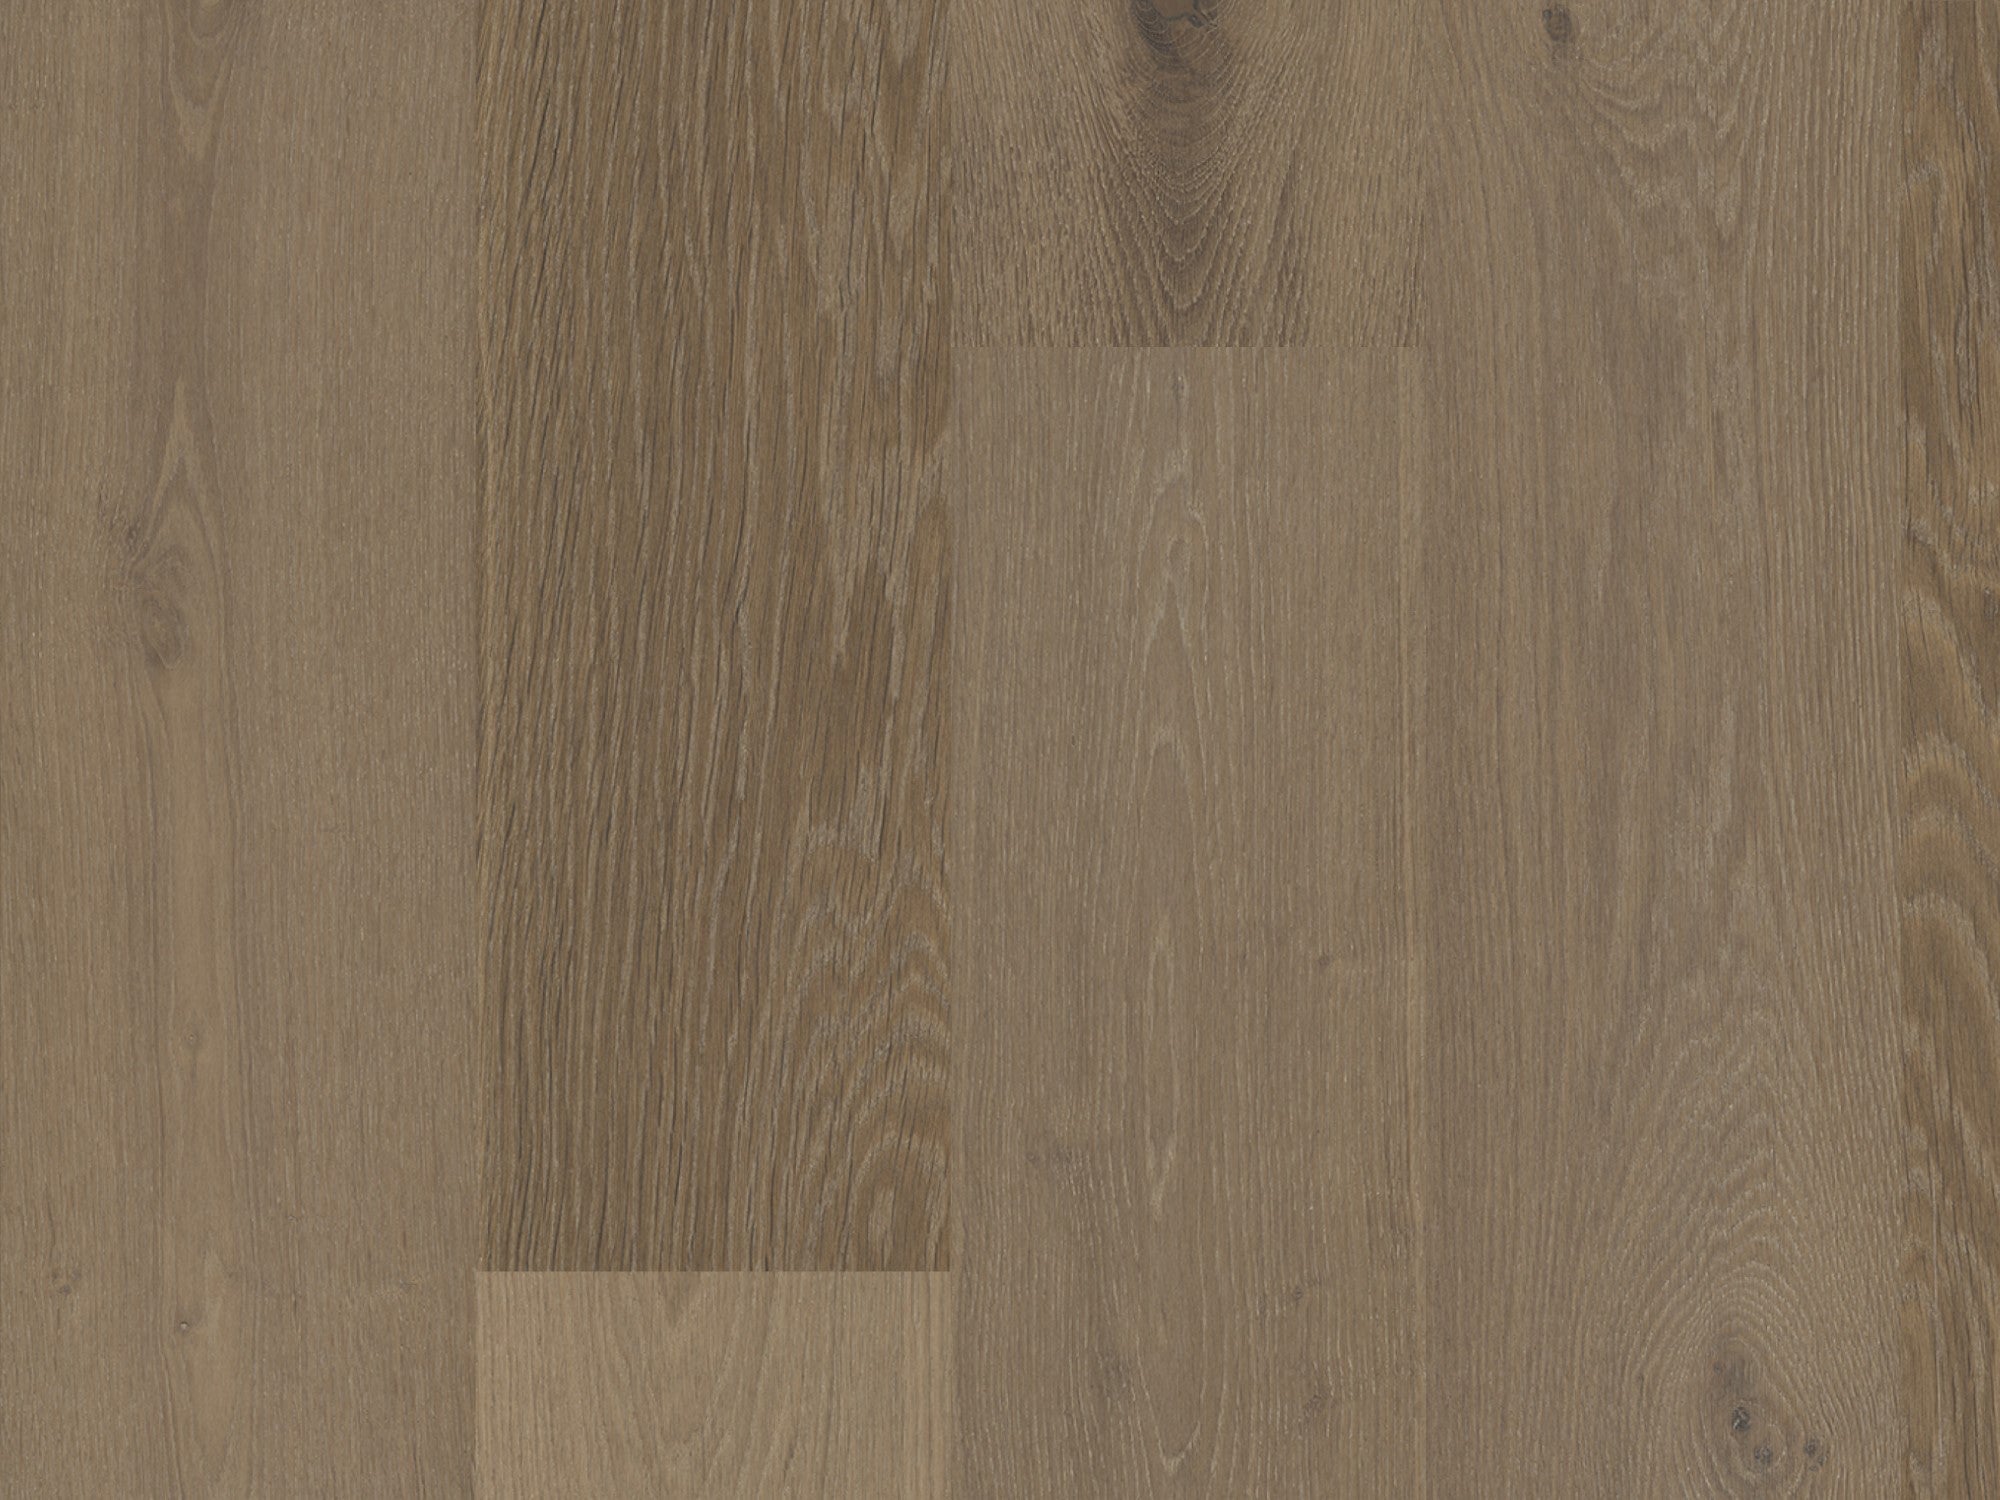 duchateau signature terra chaparral european oak engineered hardnatural wood floor uv lacquer finish for interior use distributed by surface group international